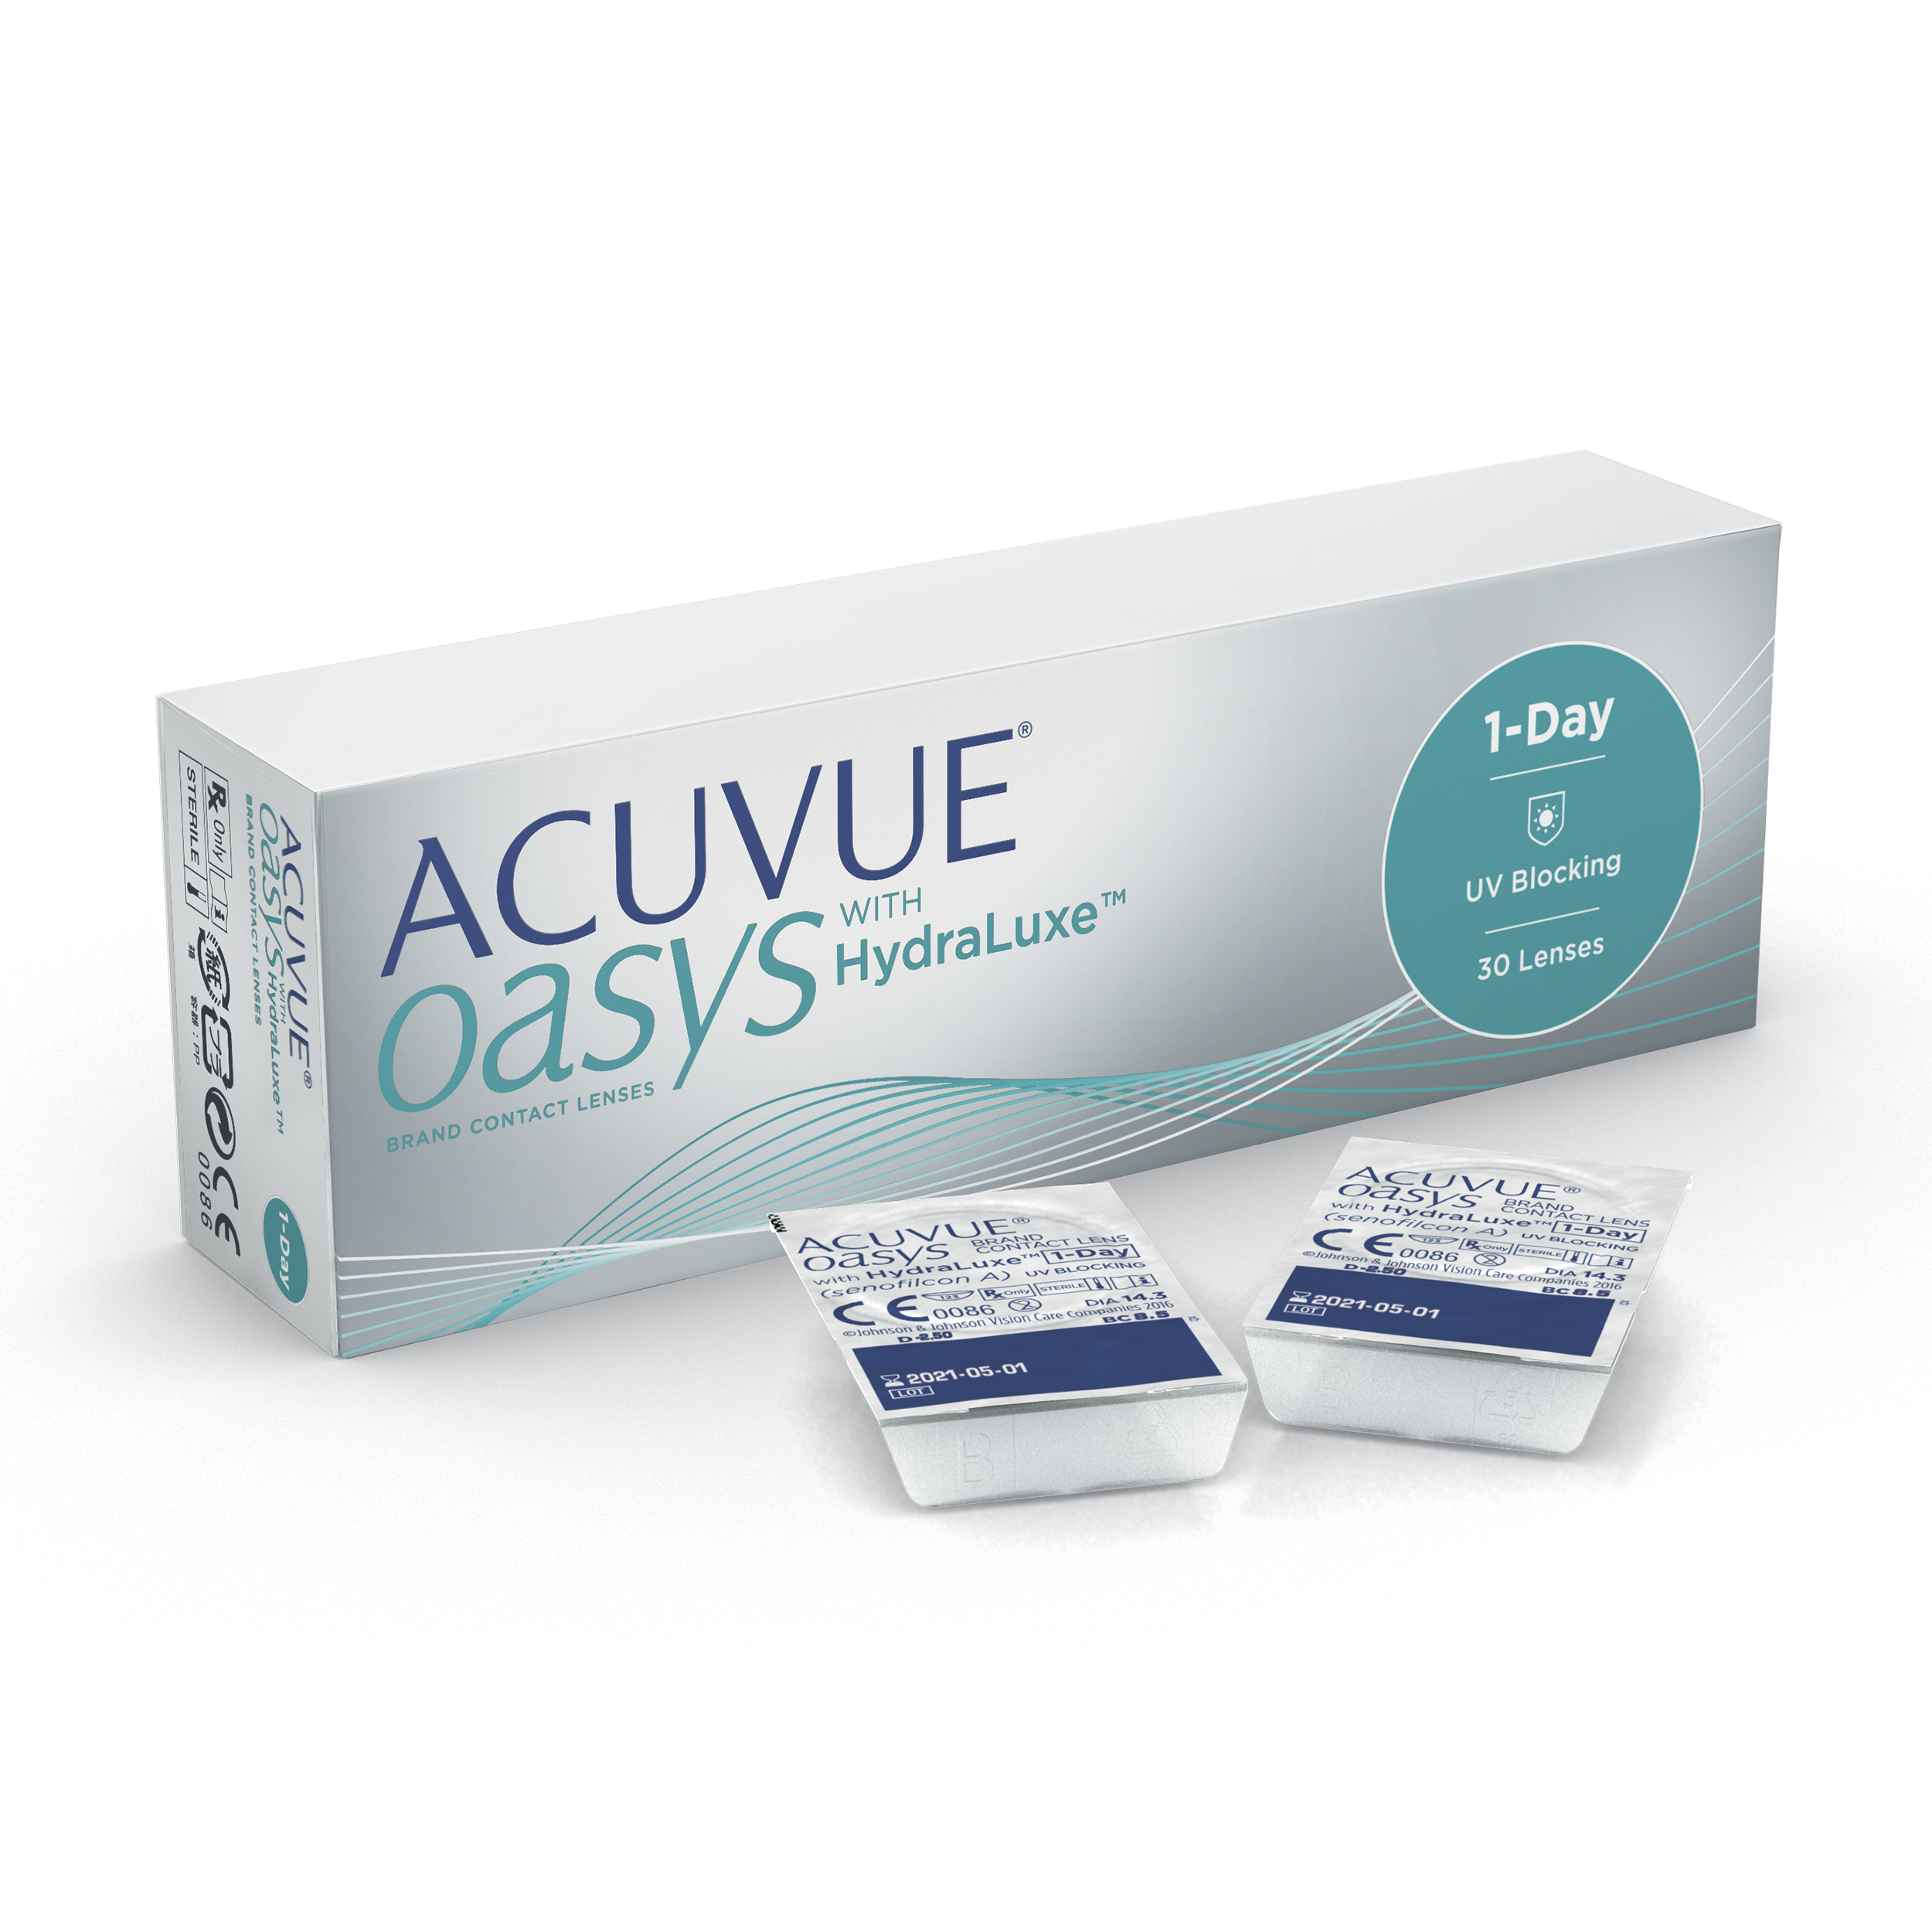 ACUVUE® OASYS 1-Day with HydraLuxe® Technology